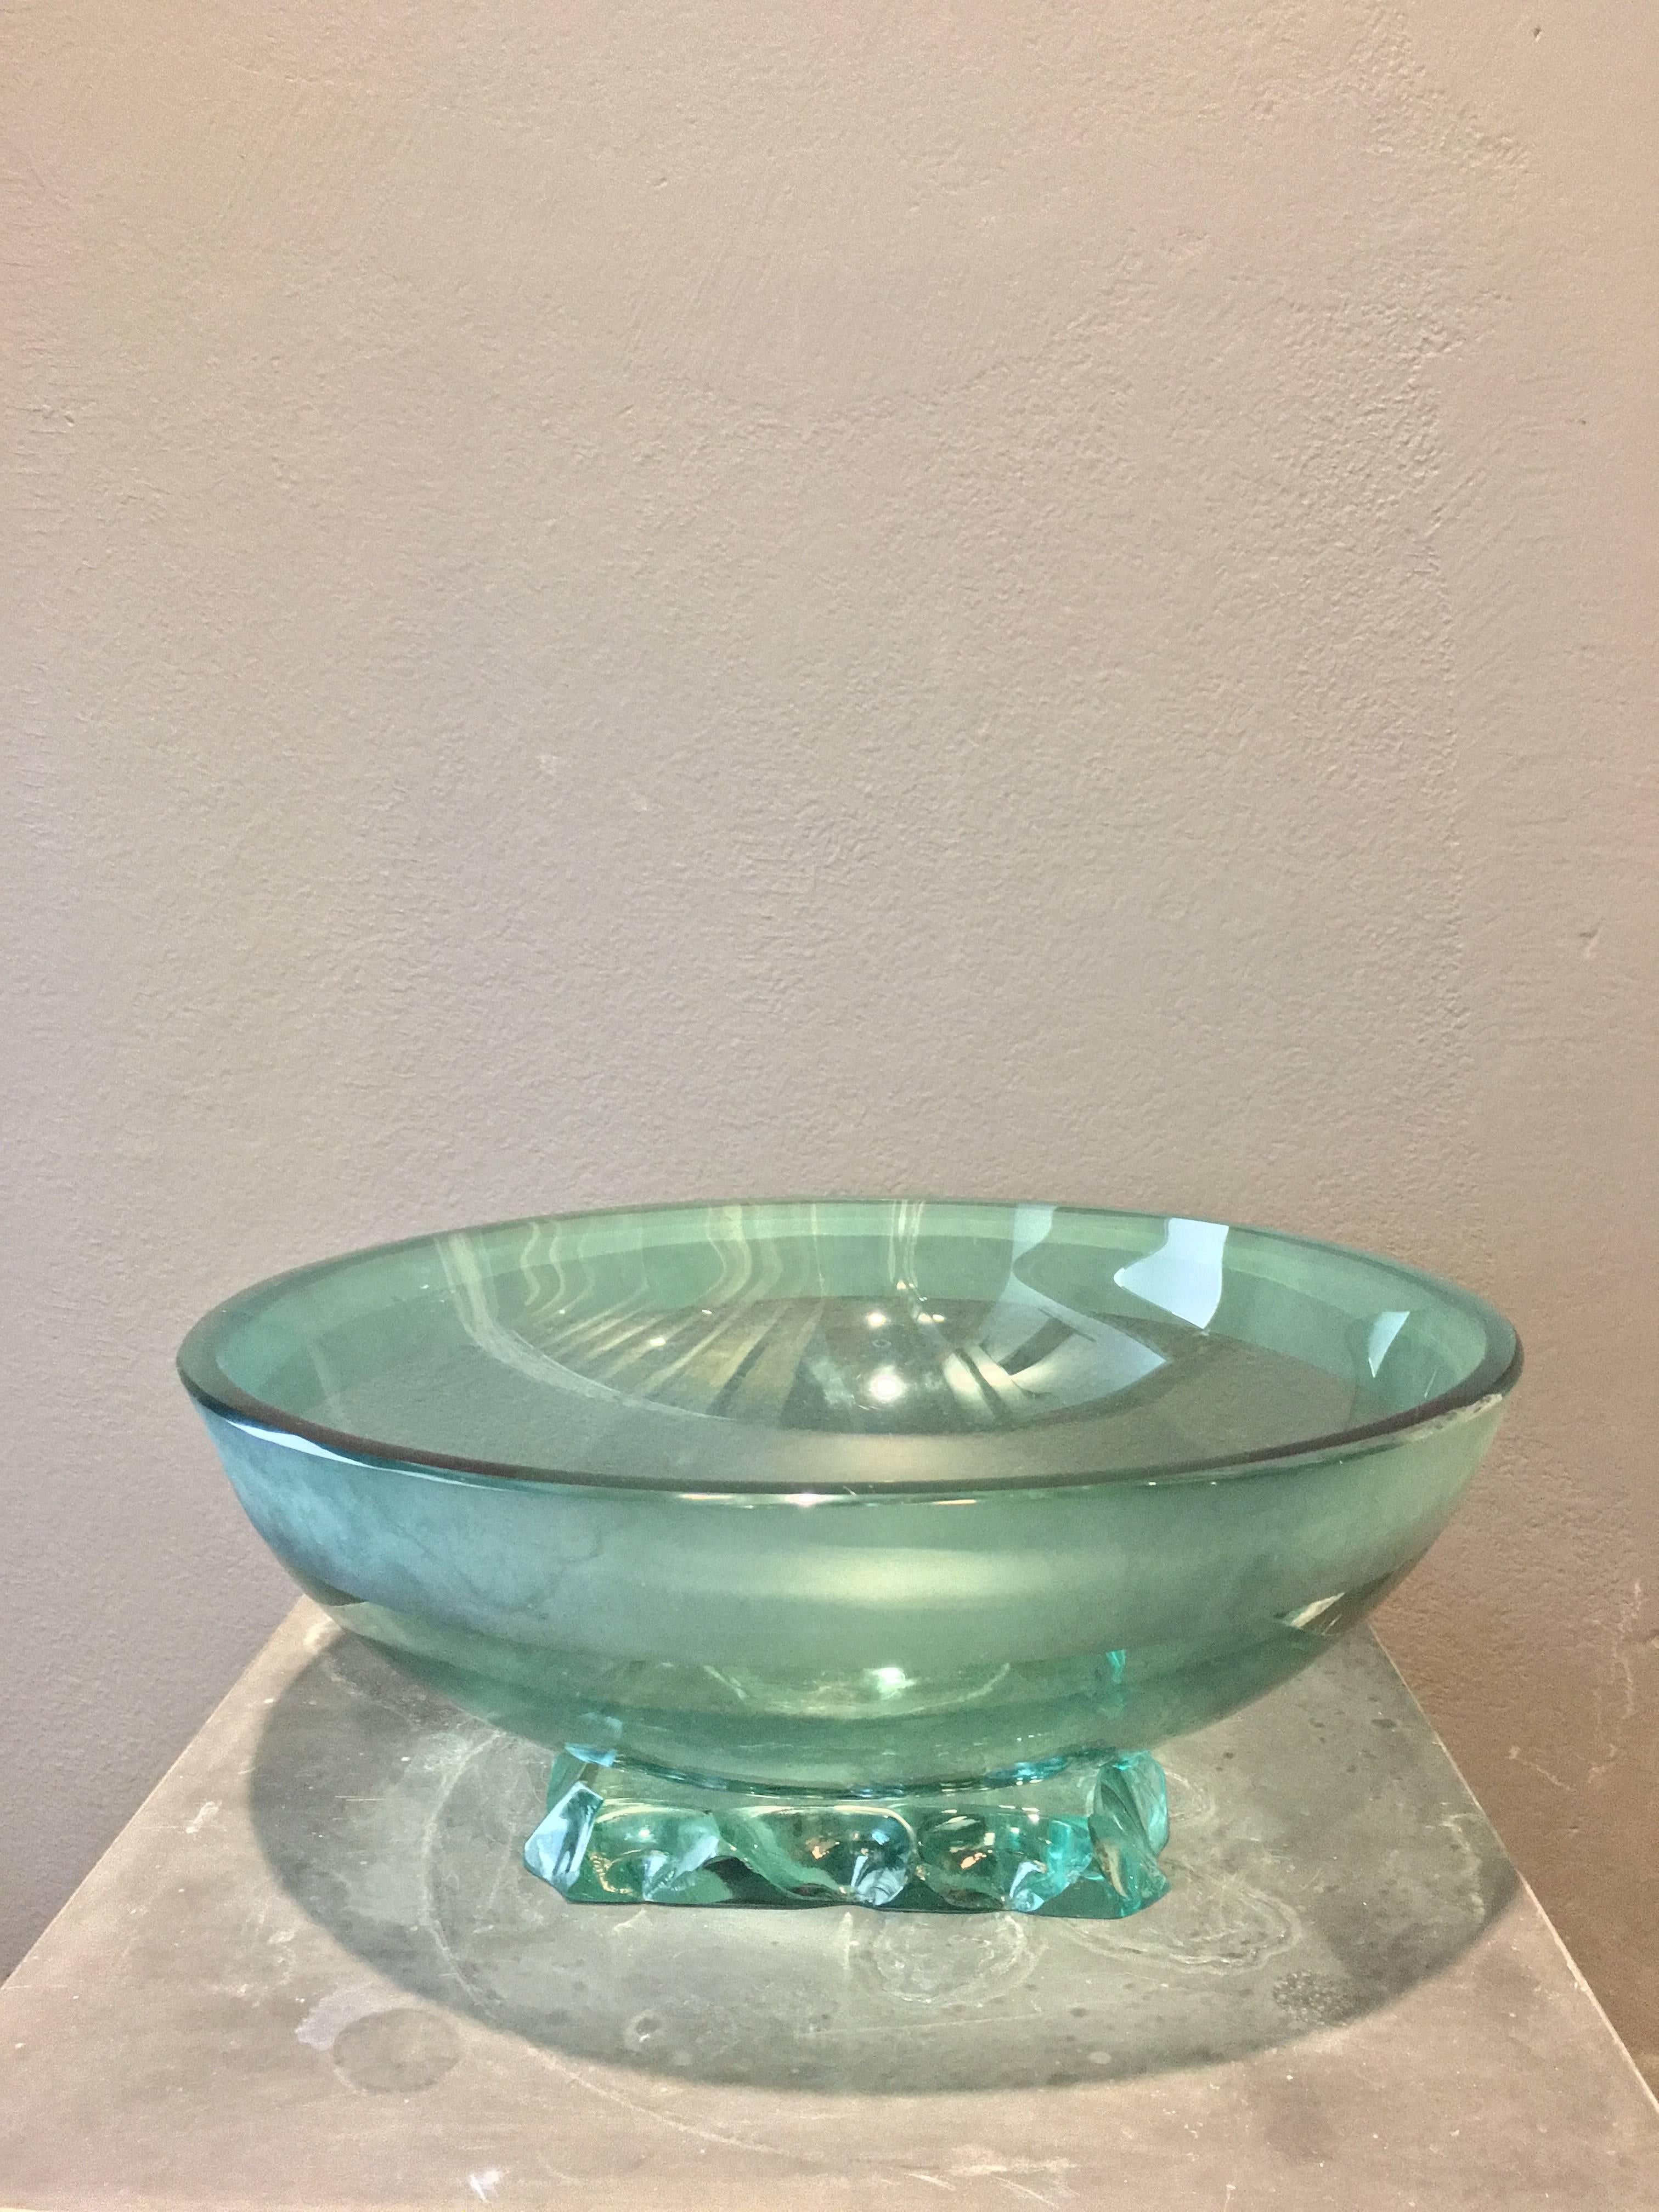 Great vintage bowl
Glass
Light green
Attributed to Fontana Arte
Designer Pietro Chiesa
Made in Italy
20th century period
Measures: H 13 x D 34 cm.